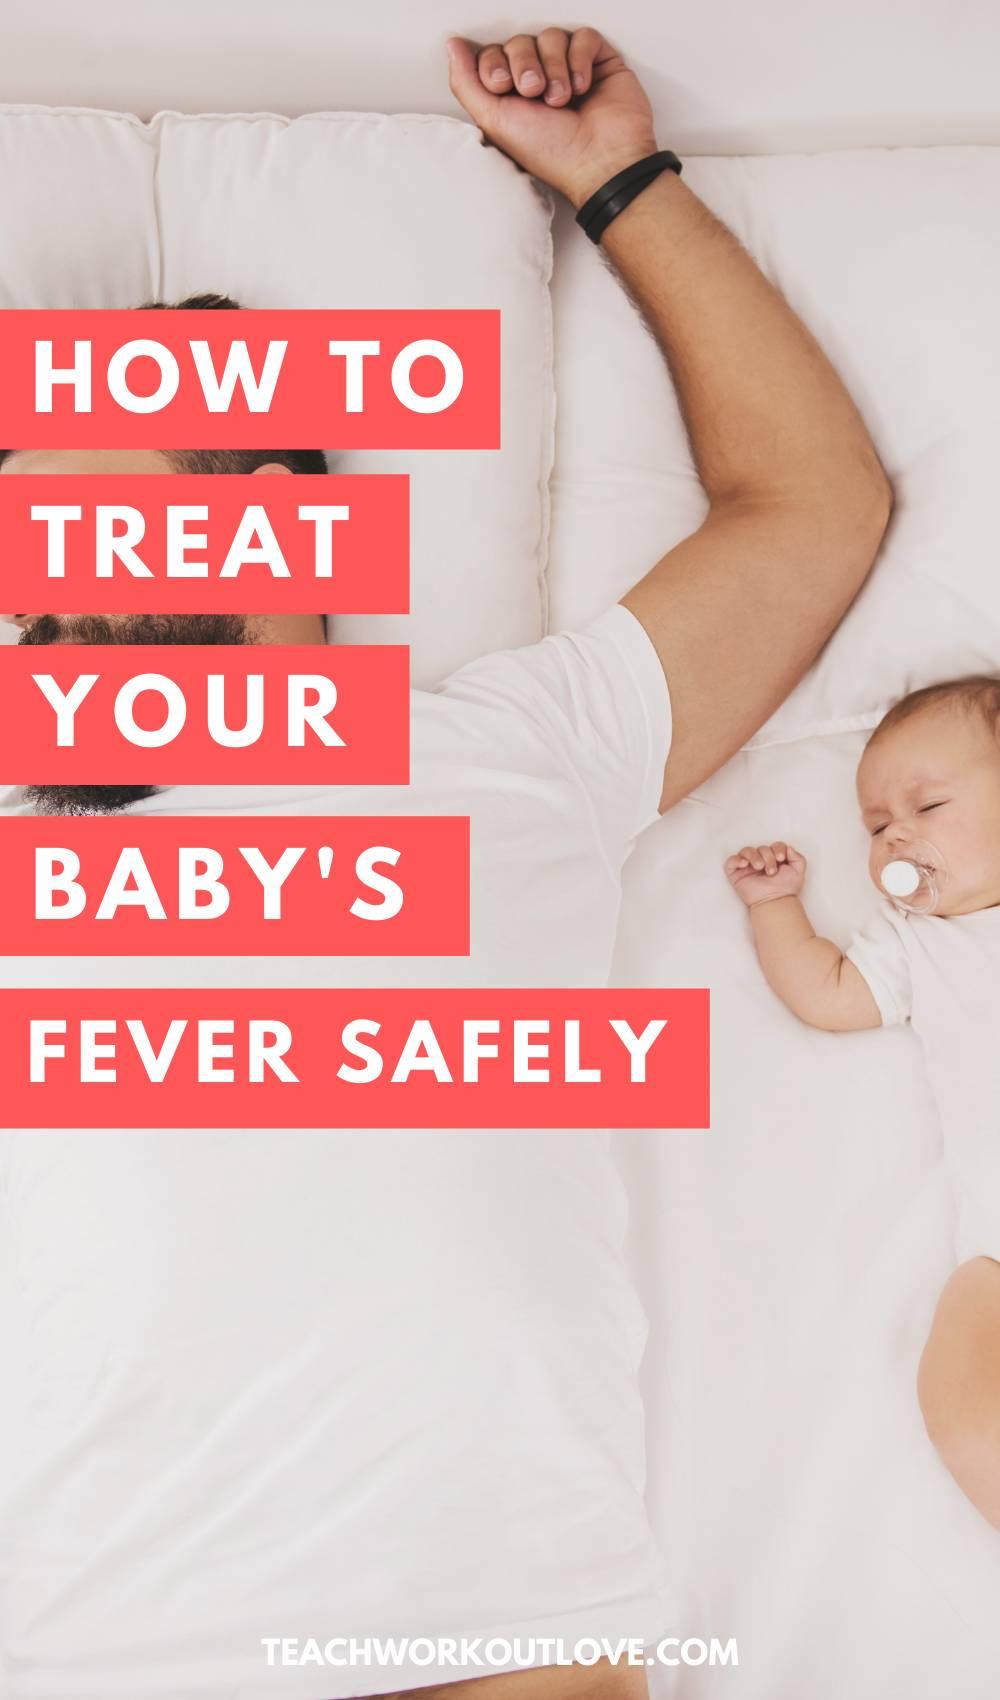 Do you know what to do when your baby has a fever? Here is how to safely treat and lower your baby's fever using this indepth guide.